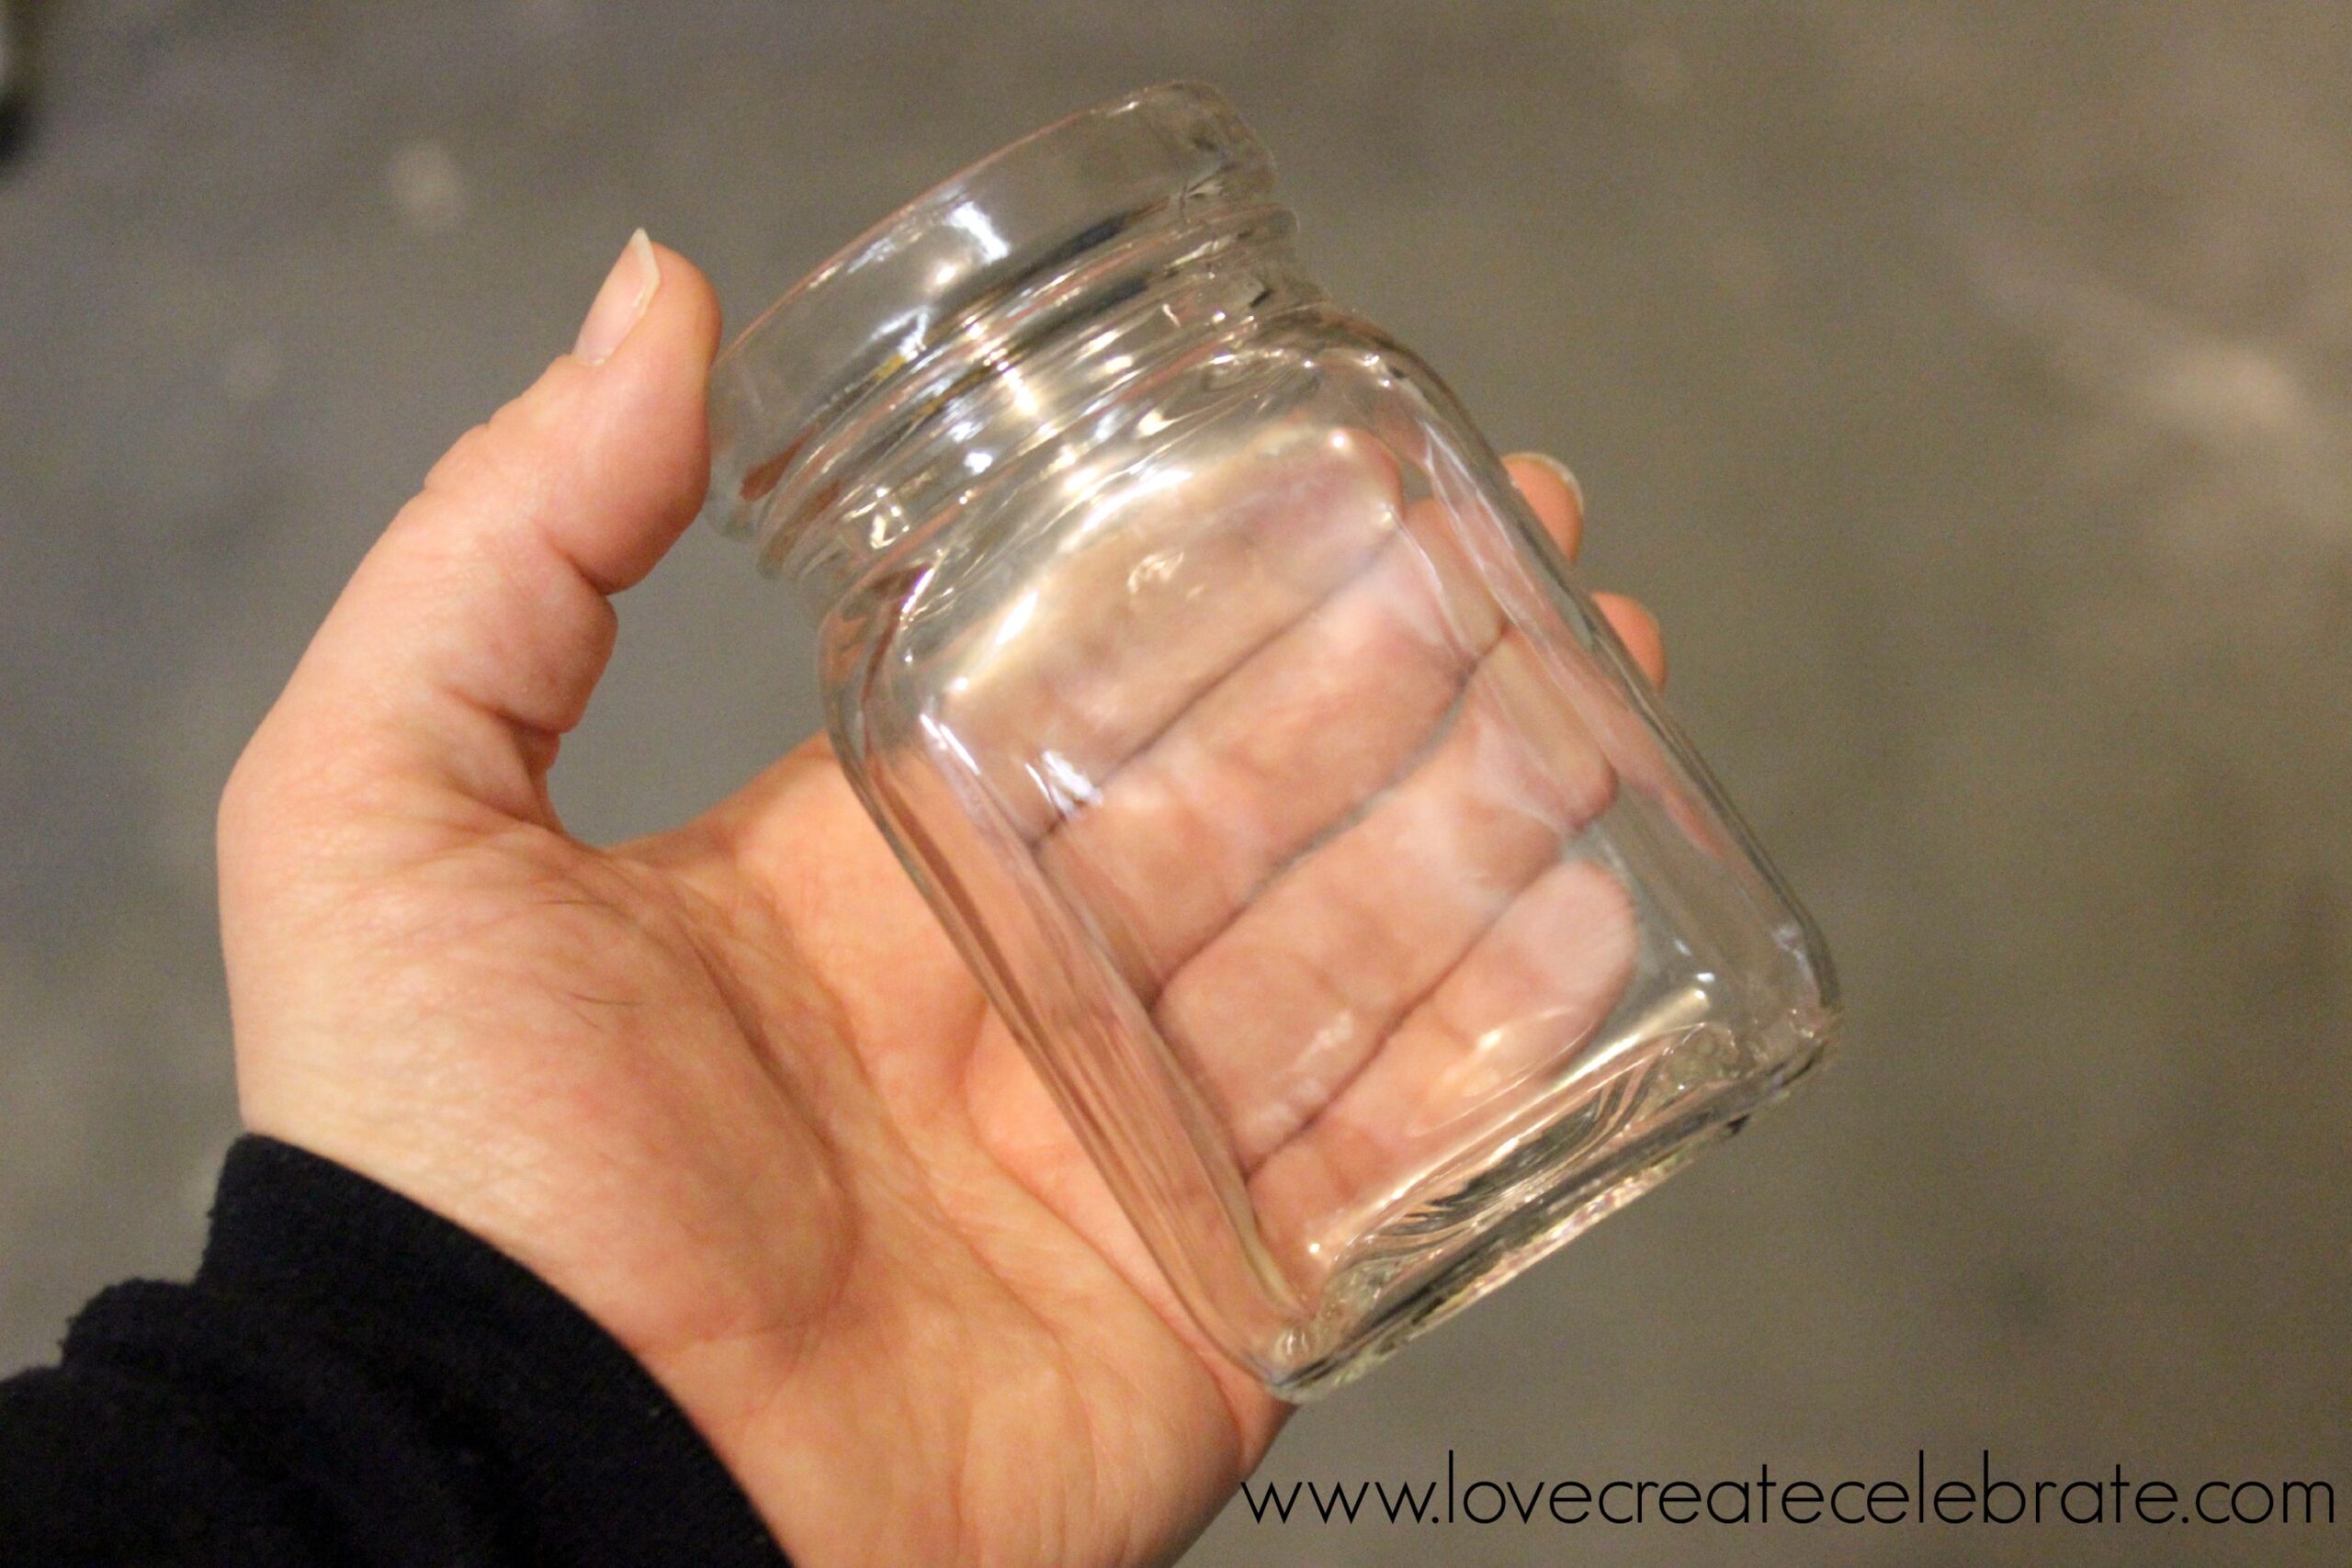 Plan your hexagon size according to the size of your glass jar